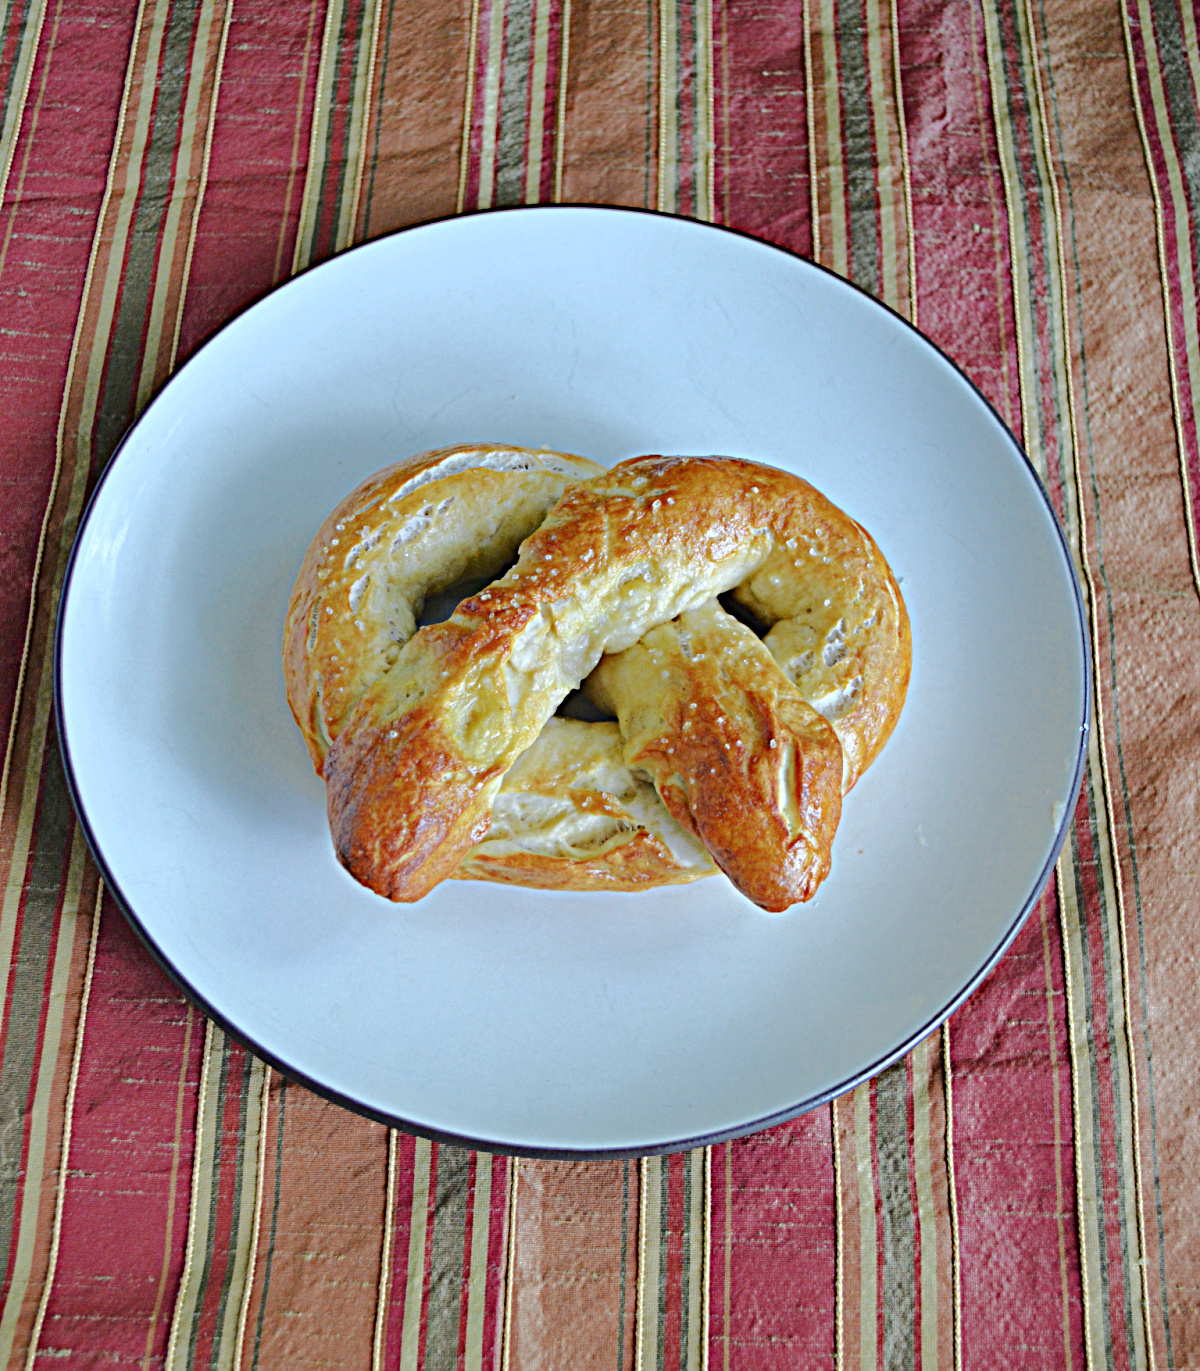 A plate with a golden brown soft pretzel on it.